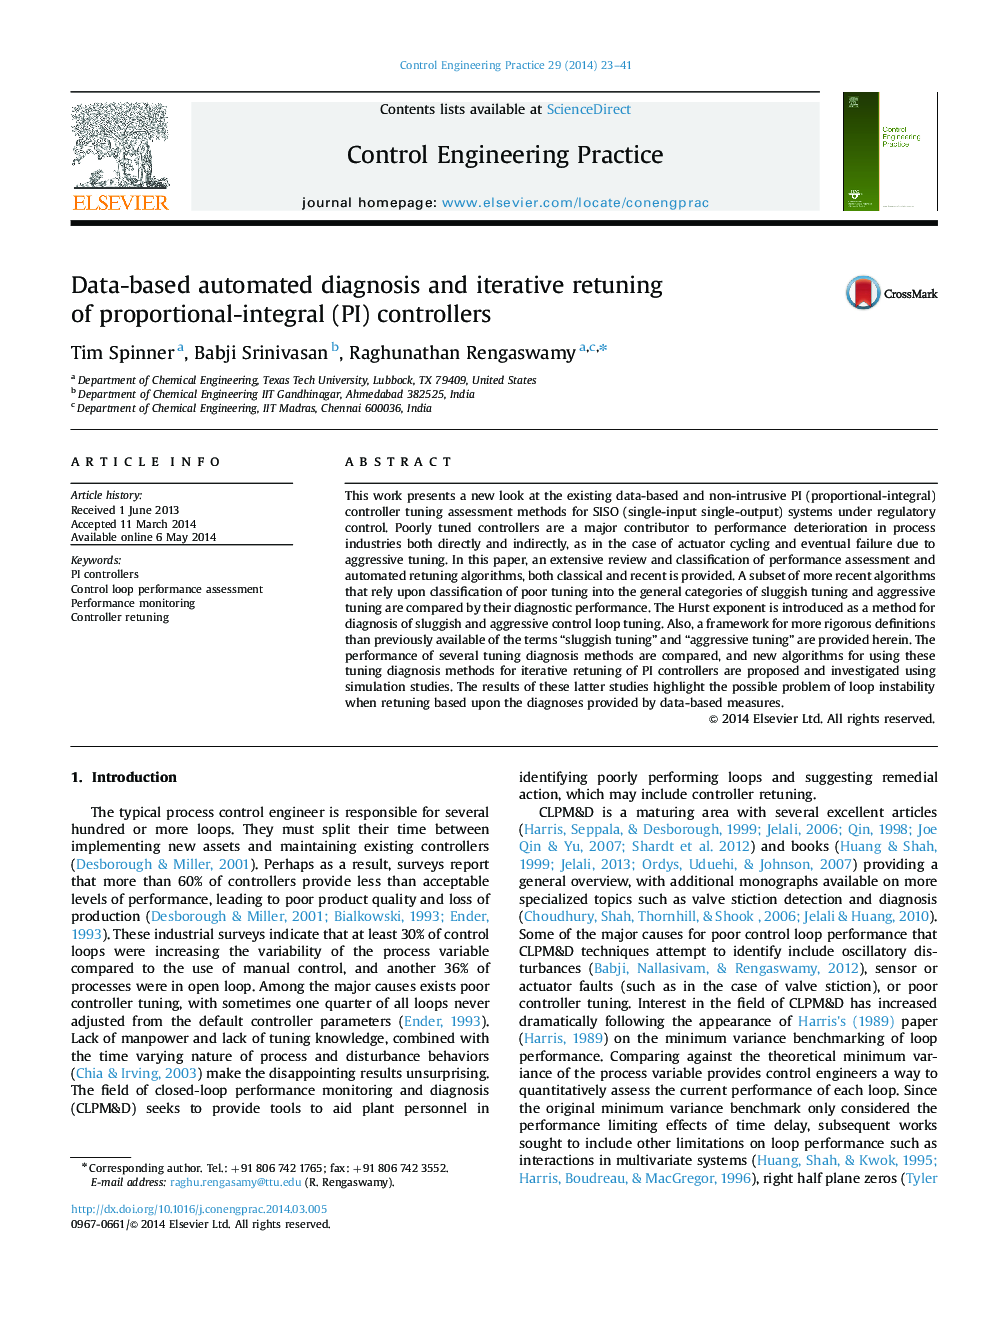 Data-based automated diagnosis and iterative retuning of proportional-integral (PI) controllers